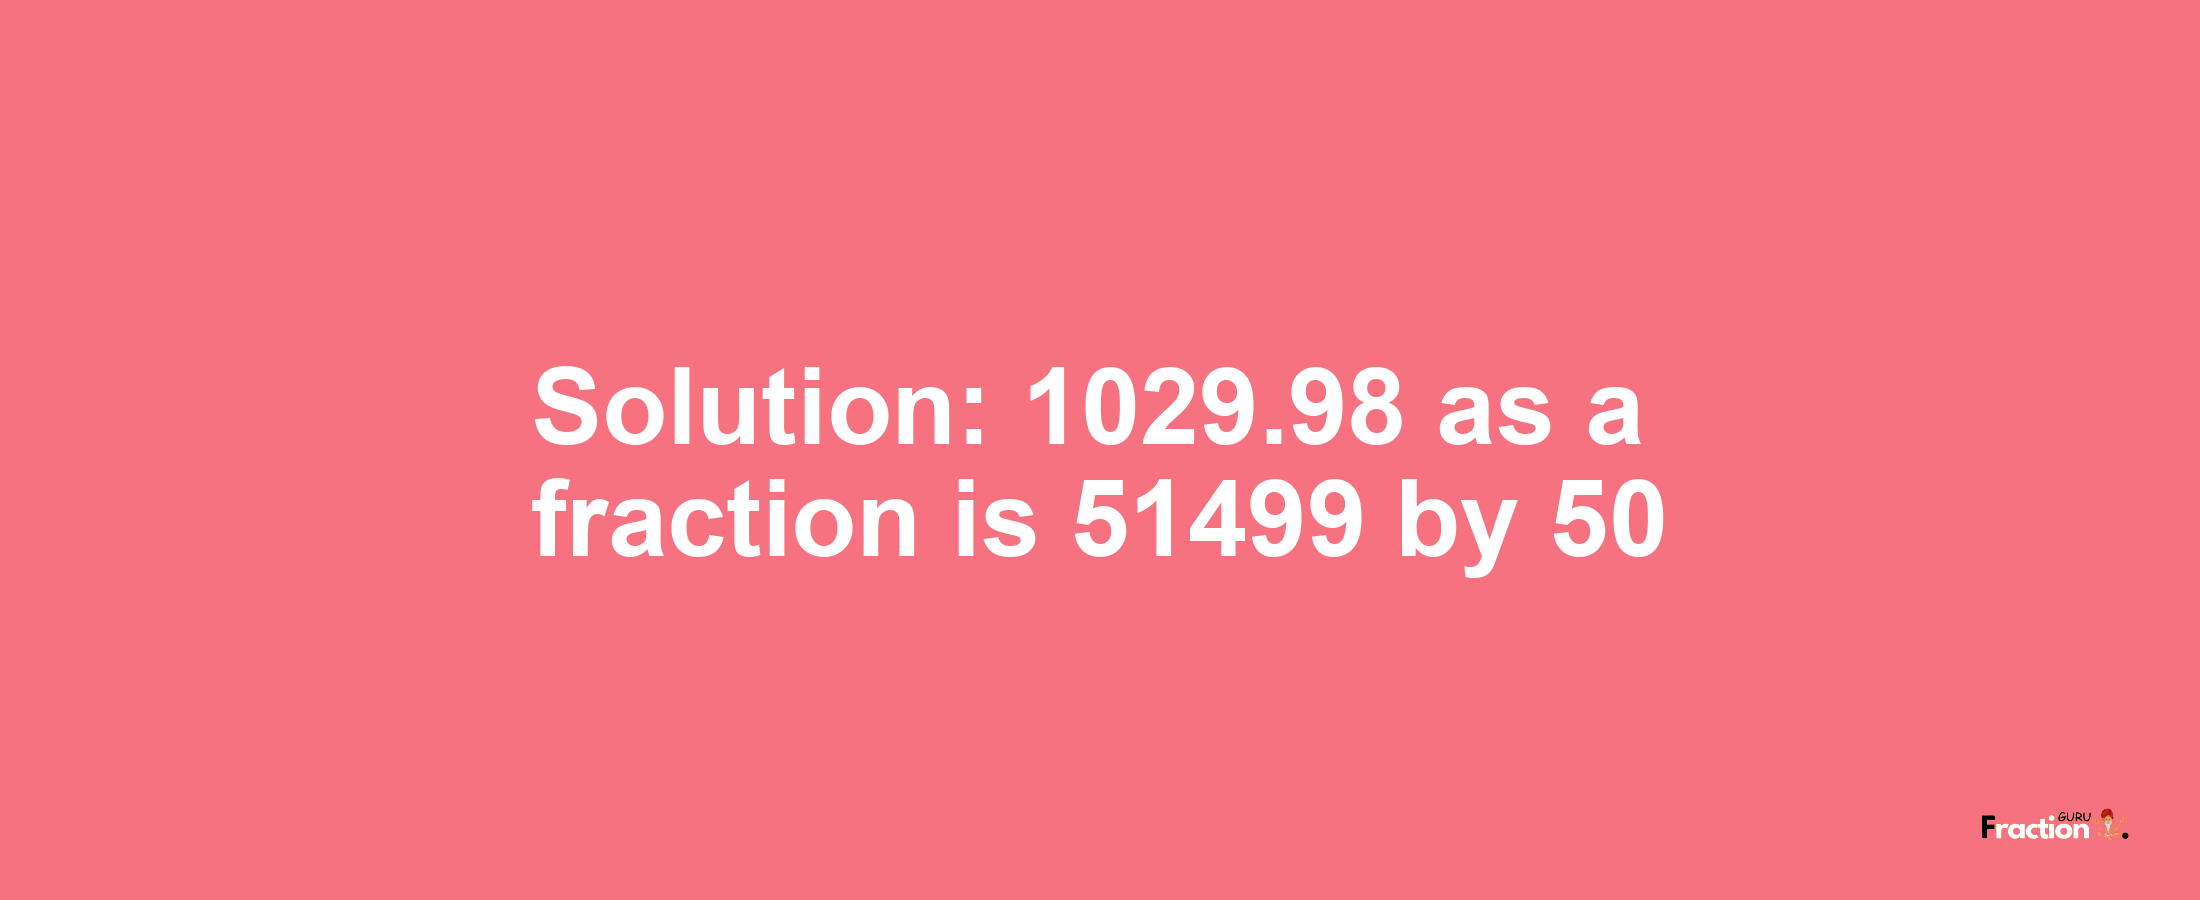 Solution:1029.98 as a fraction is 51499/50